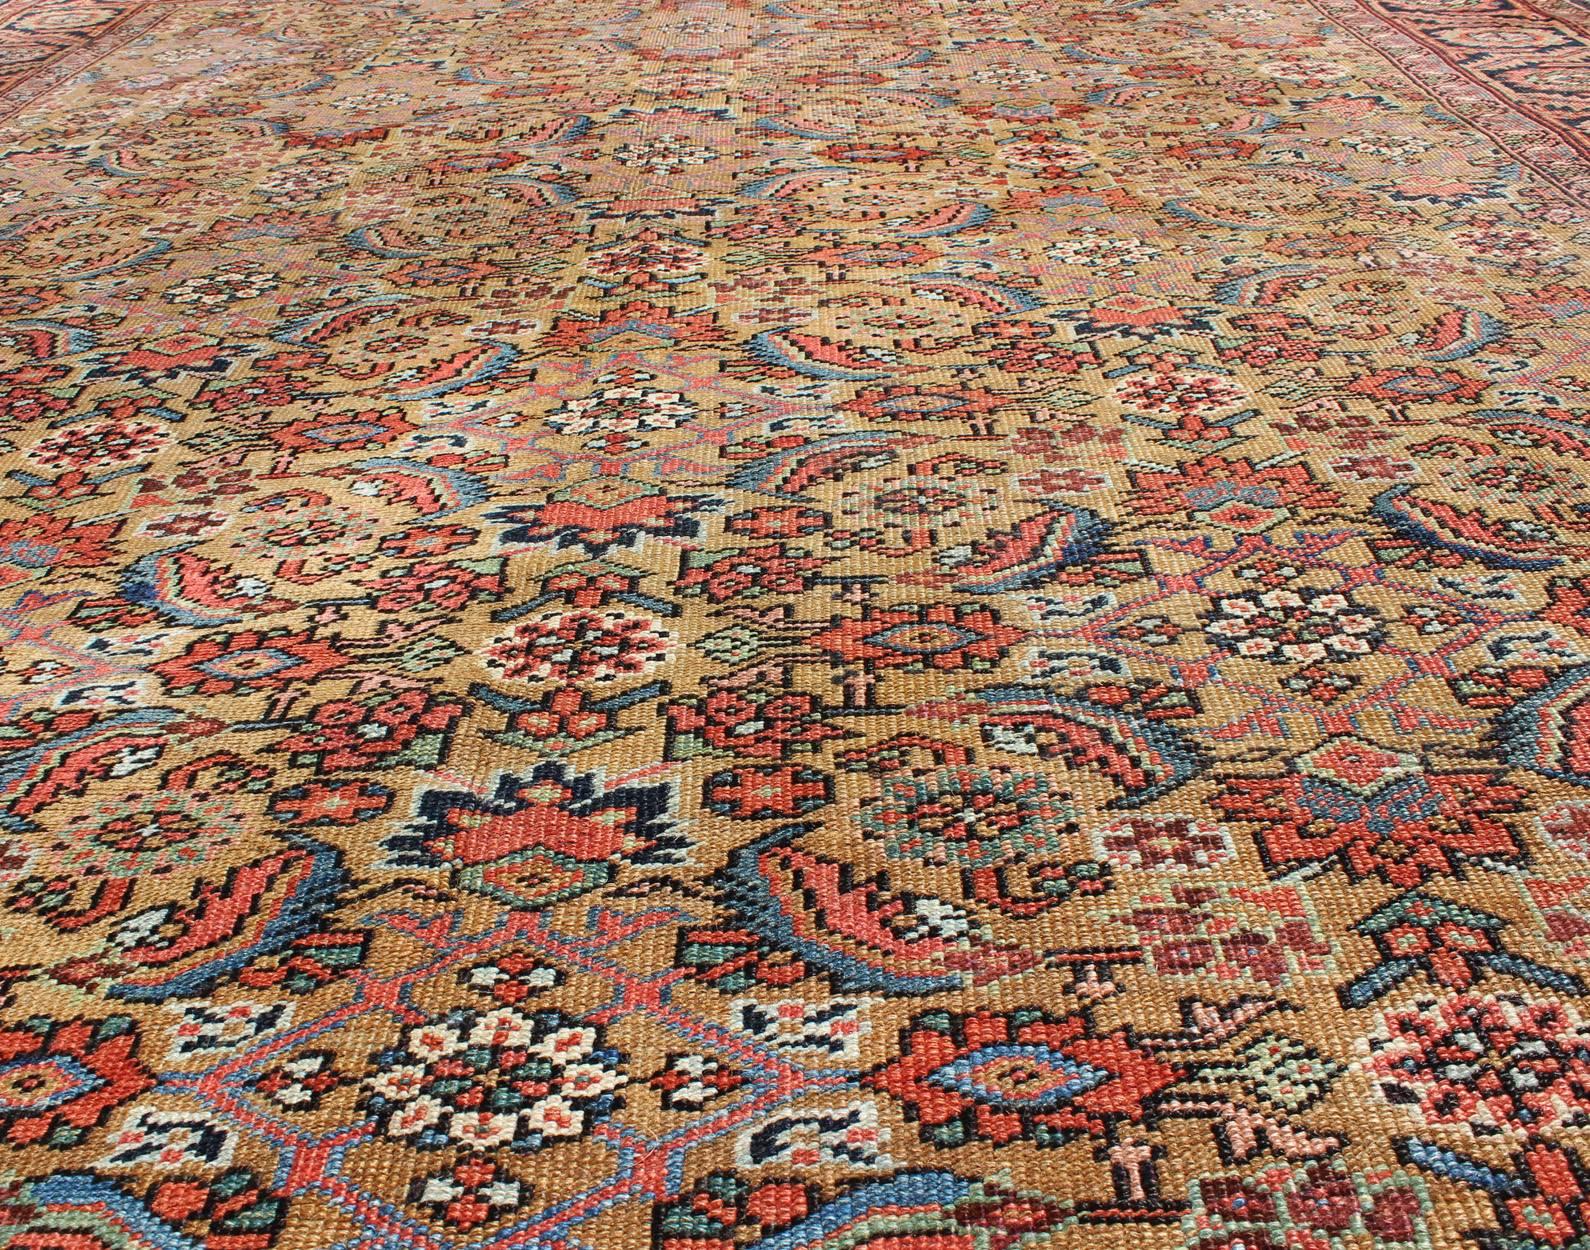 19th Century Antique Persian Bakhshaish Carpet with All Over Herati Design in Gold and Blue